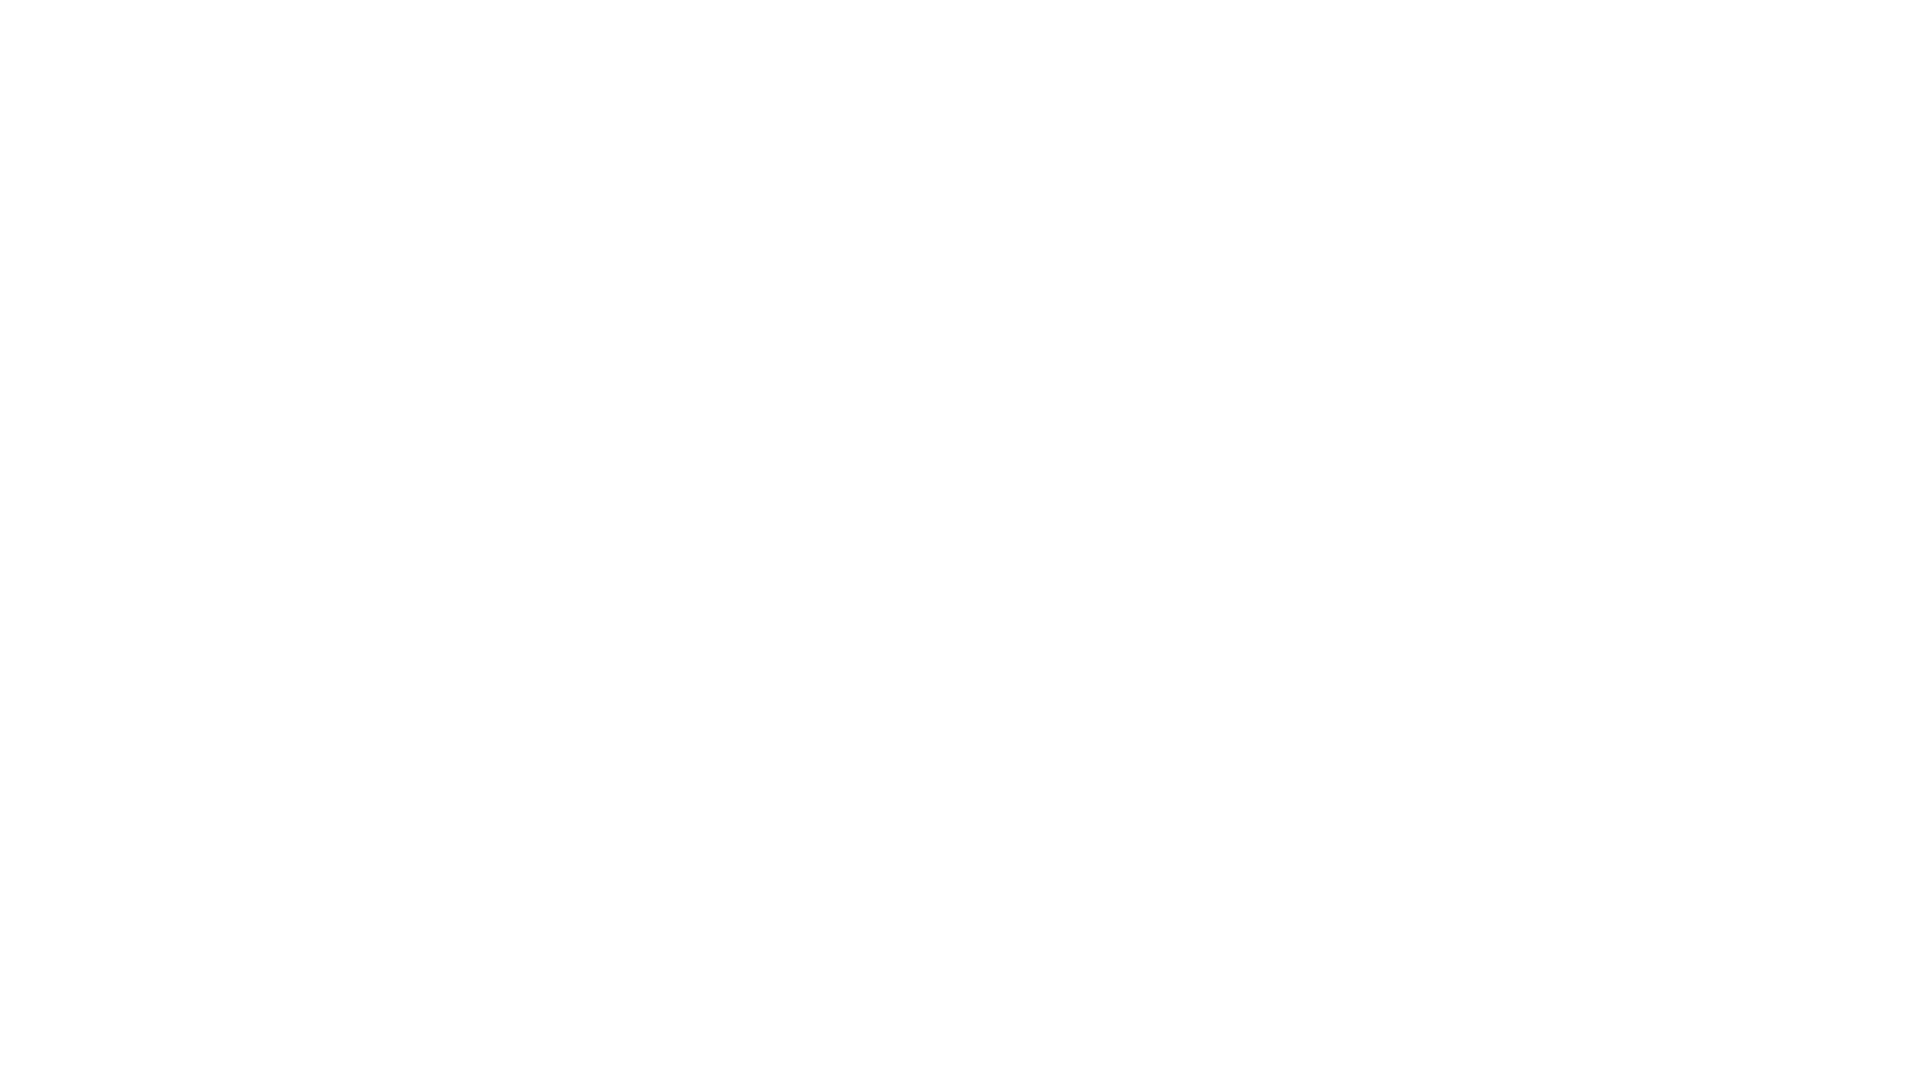 The clock is ticking